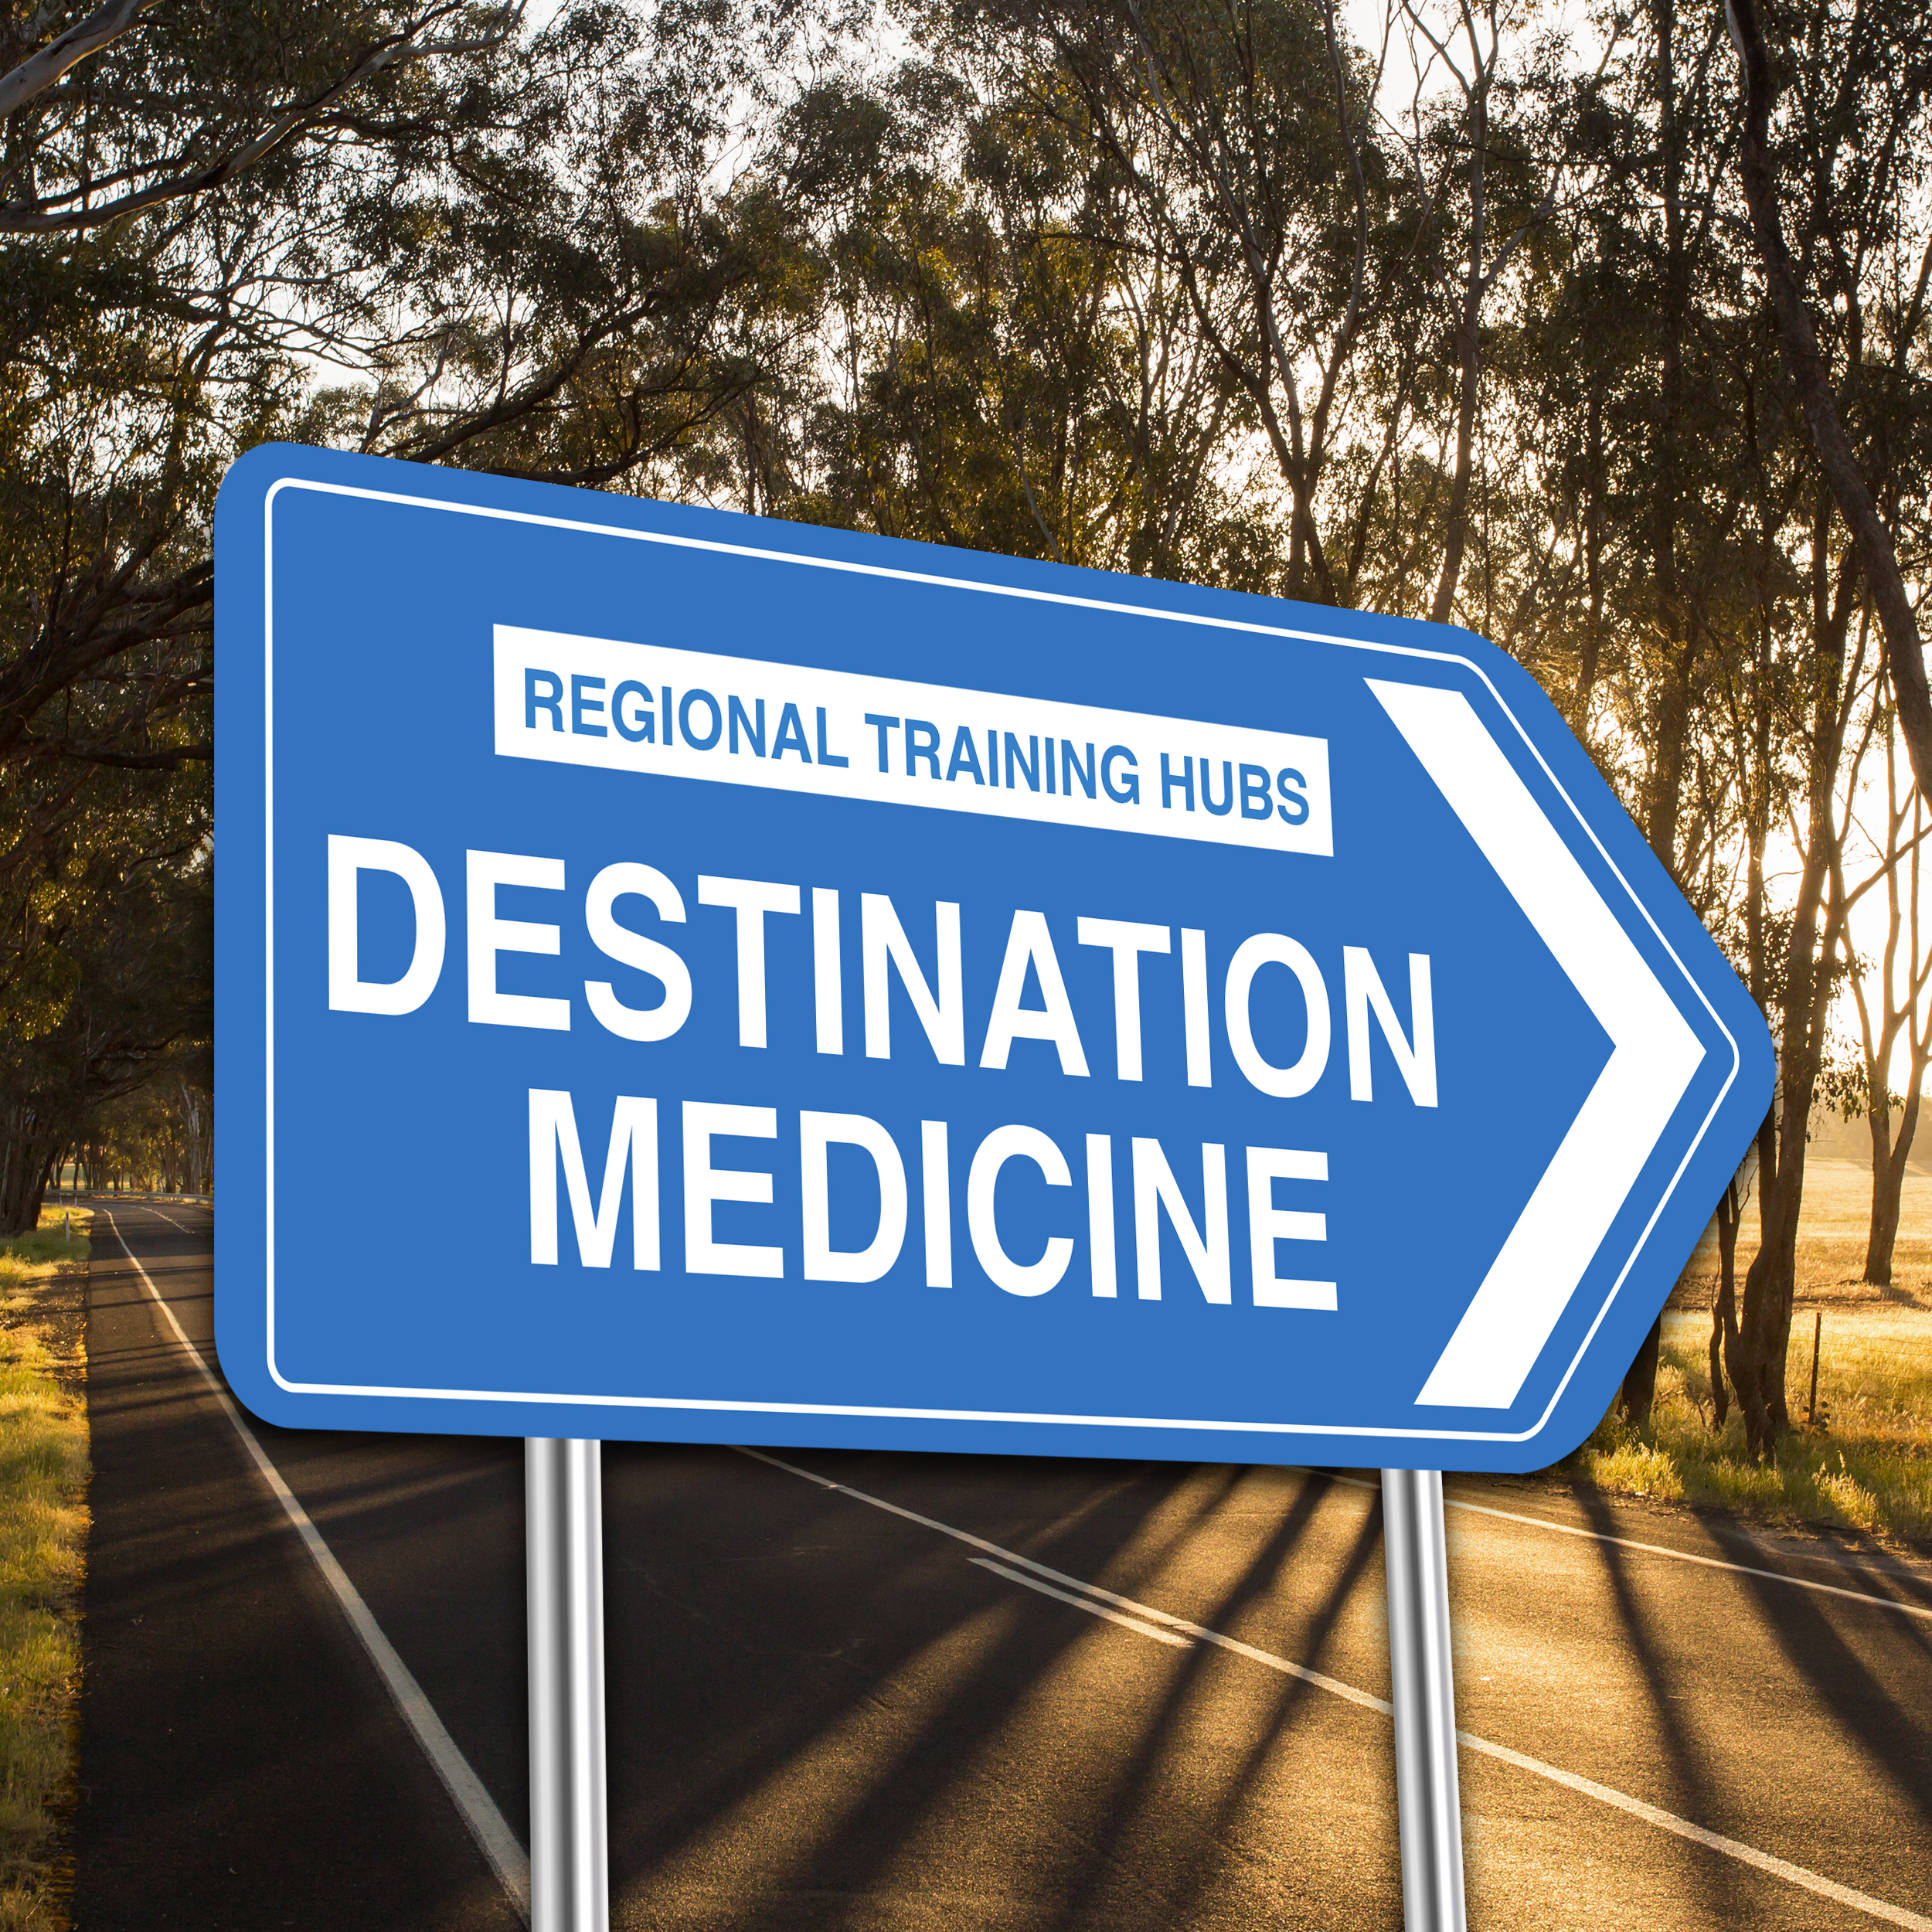 Doctors in Training: The bush calls to you – Dr Shannon Nott and the adventure of Rural Generalism